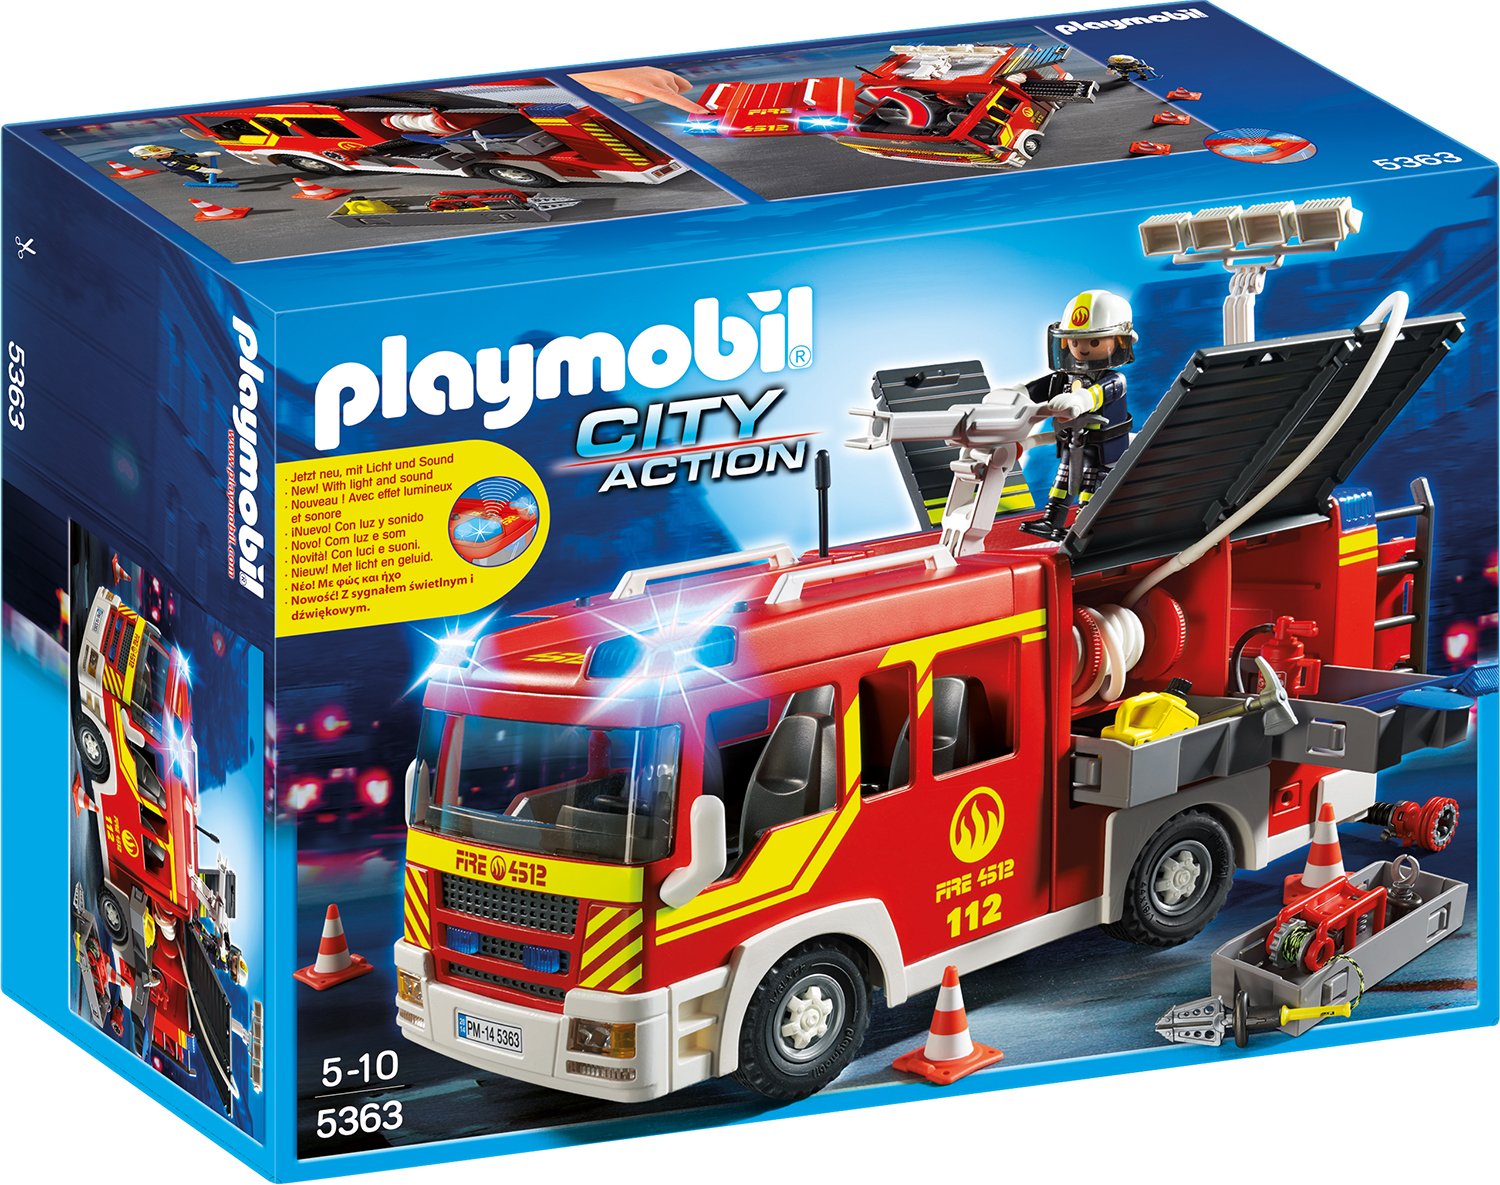 Playmobil City Action Fire Engine With Lights And Sound